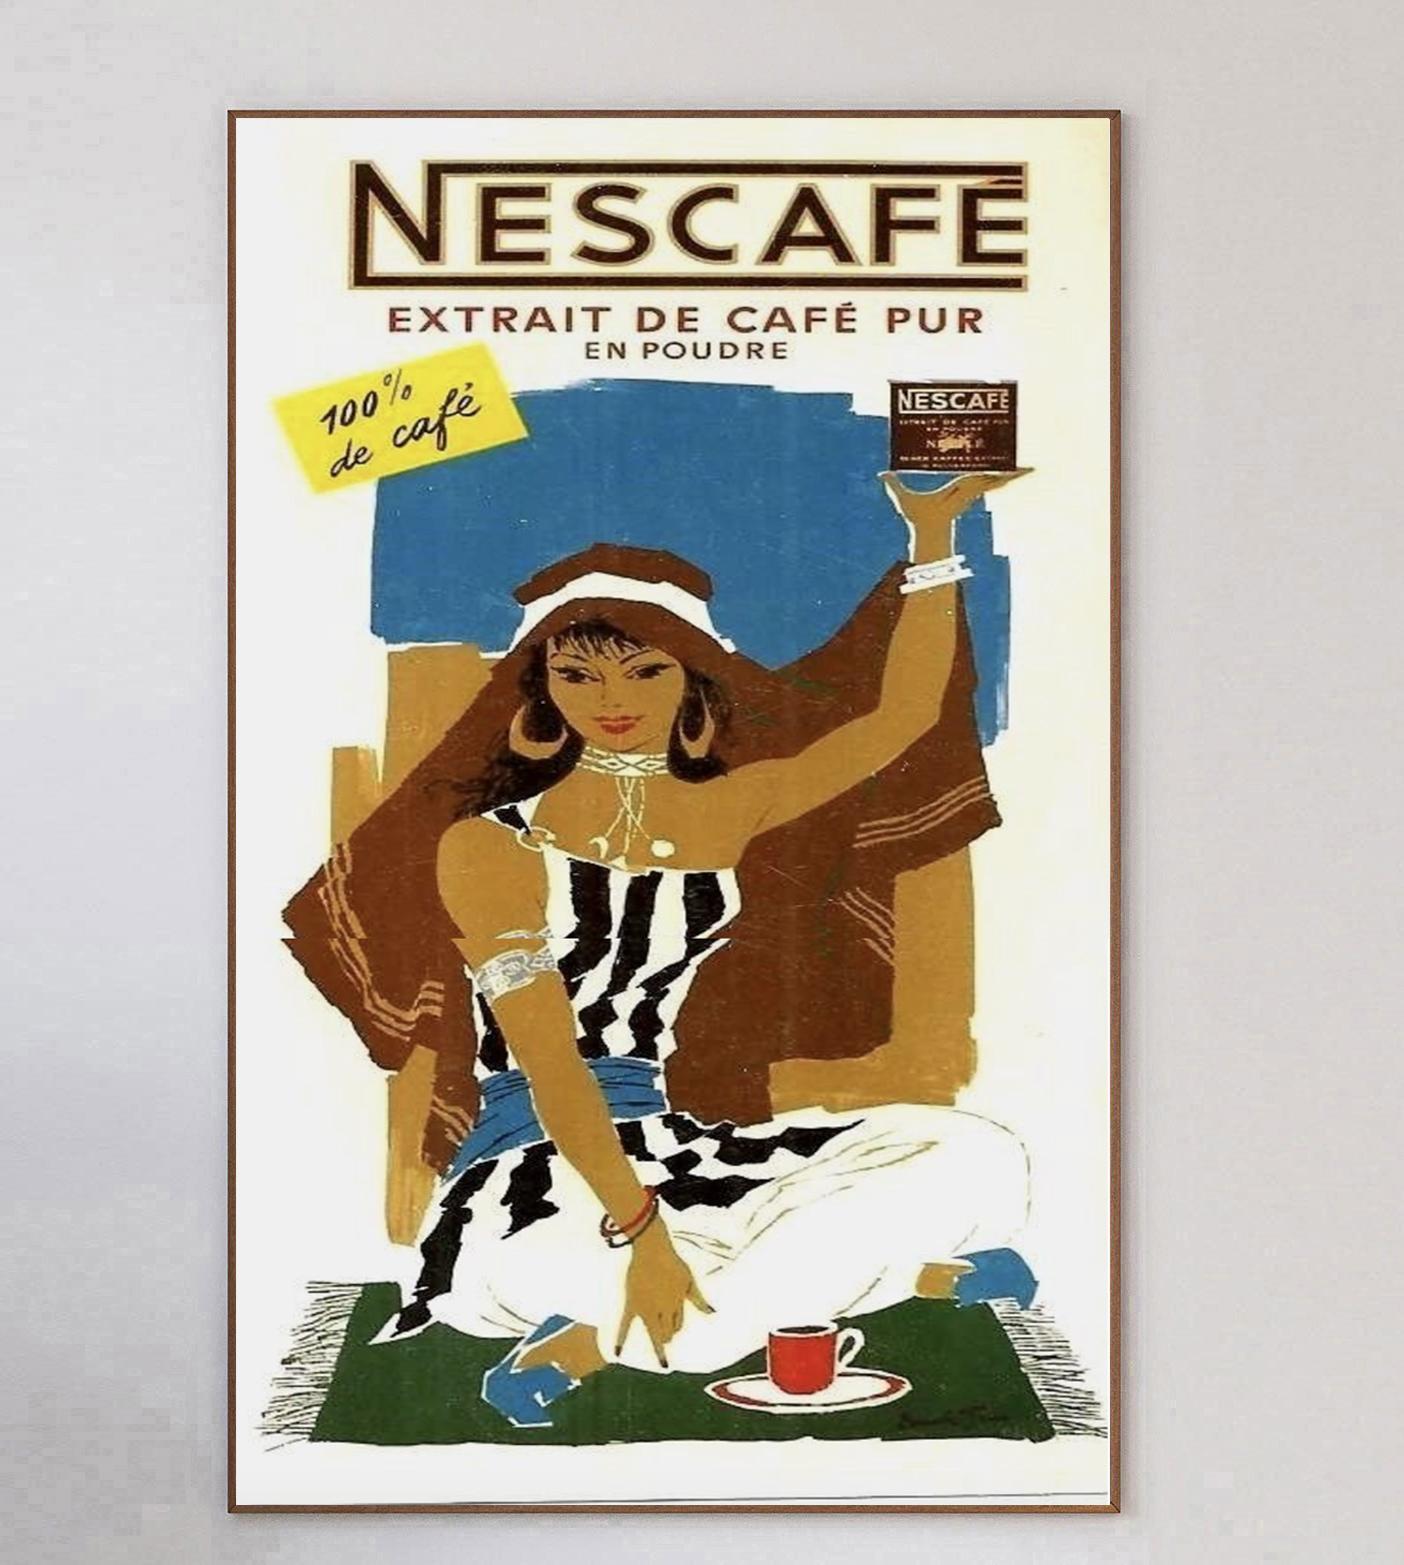 With beautiful artwork from Swiss graphic designer Donald Brun depicting a woman sat enjoying a coffee, this gorgeous poster was created in 1960 to promote Nescafe. Beginning in Switzerland in 1938, Nescafe is Nestle's flagship coffee brand and